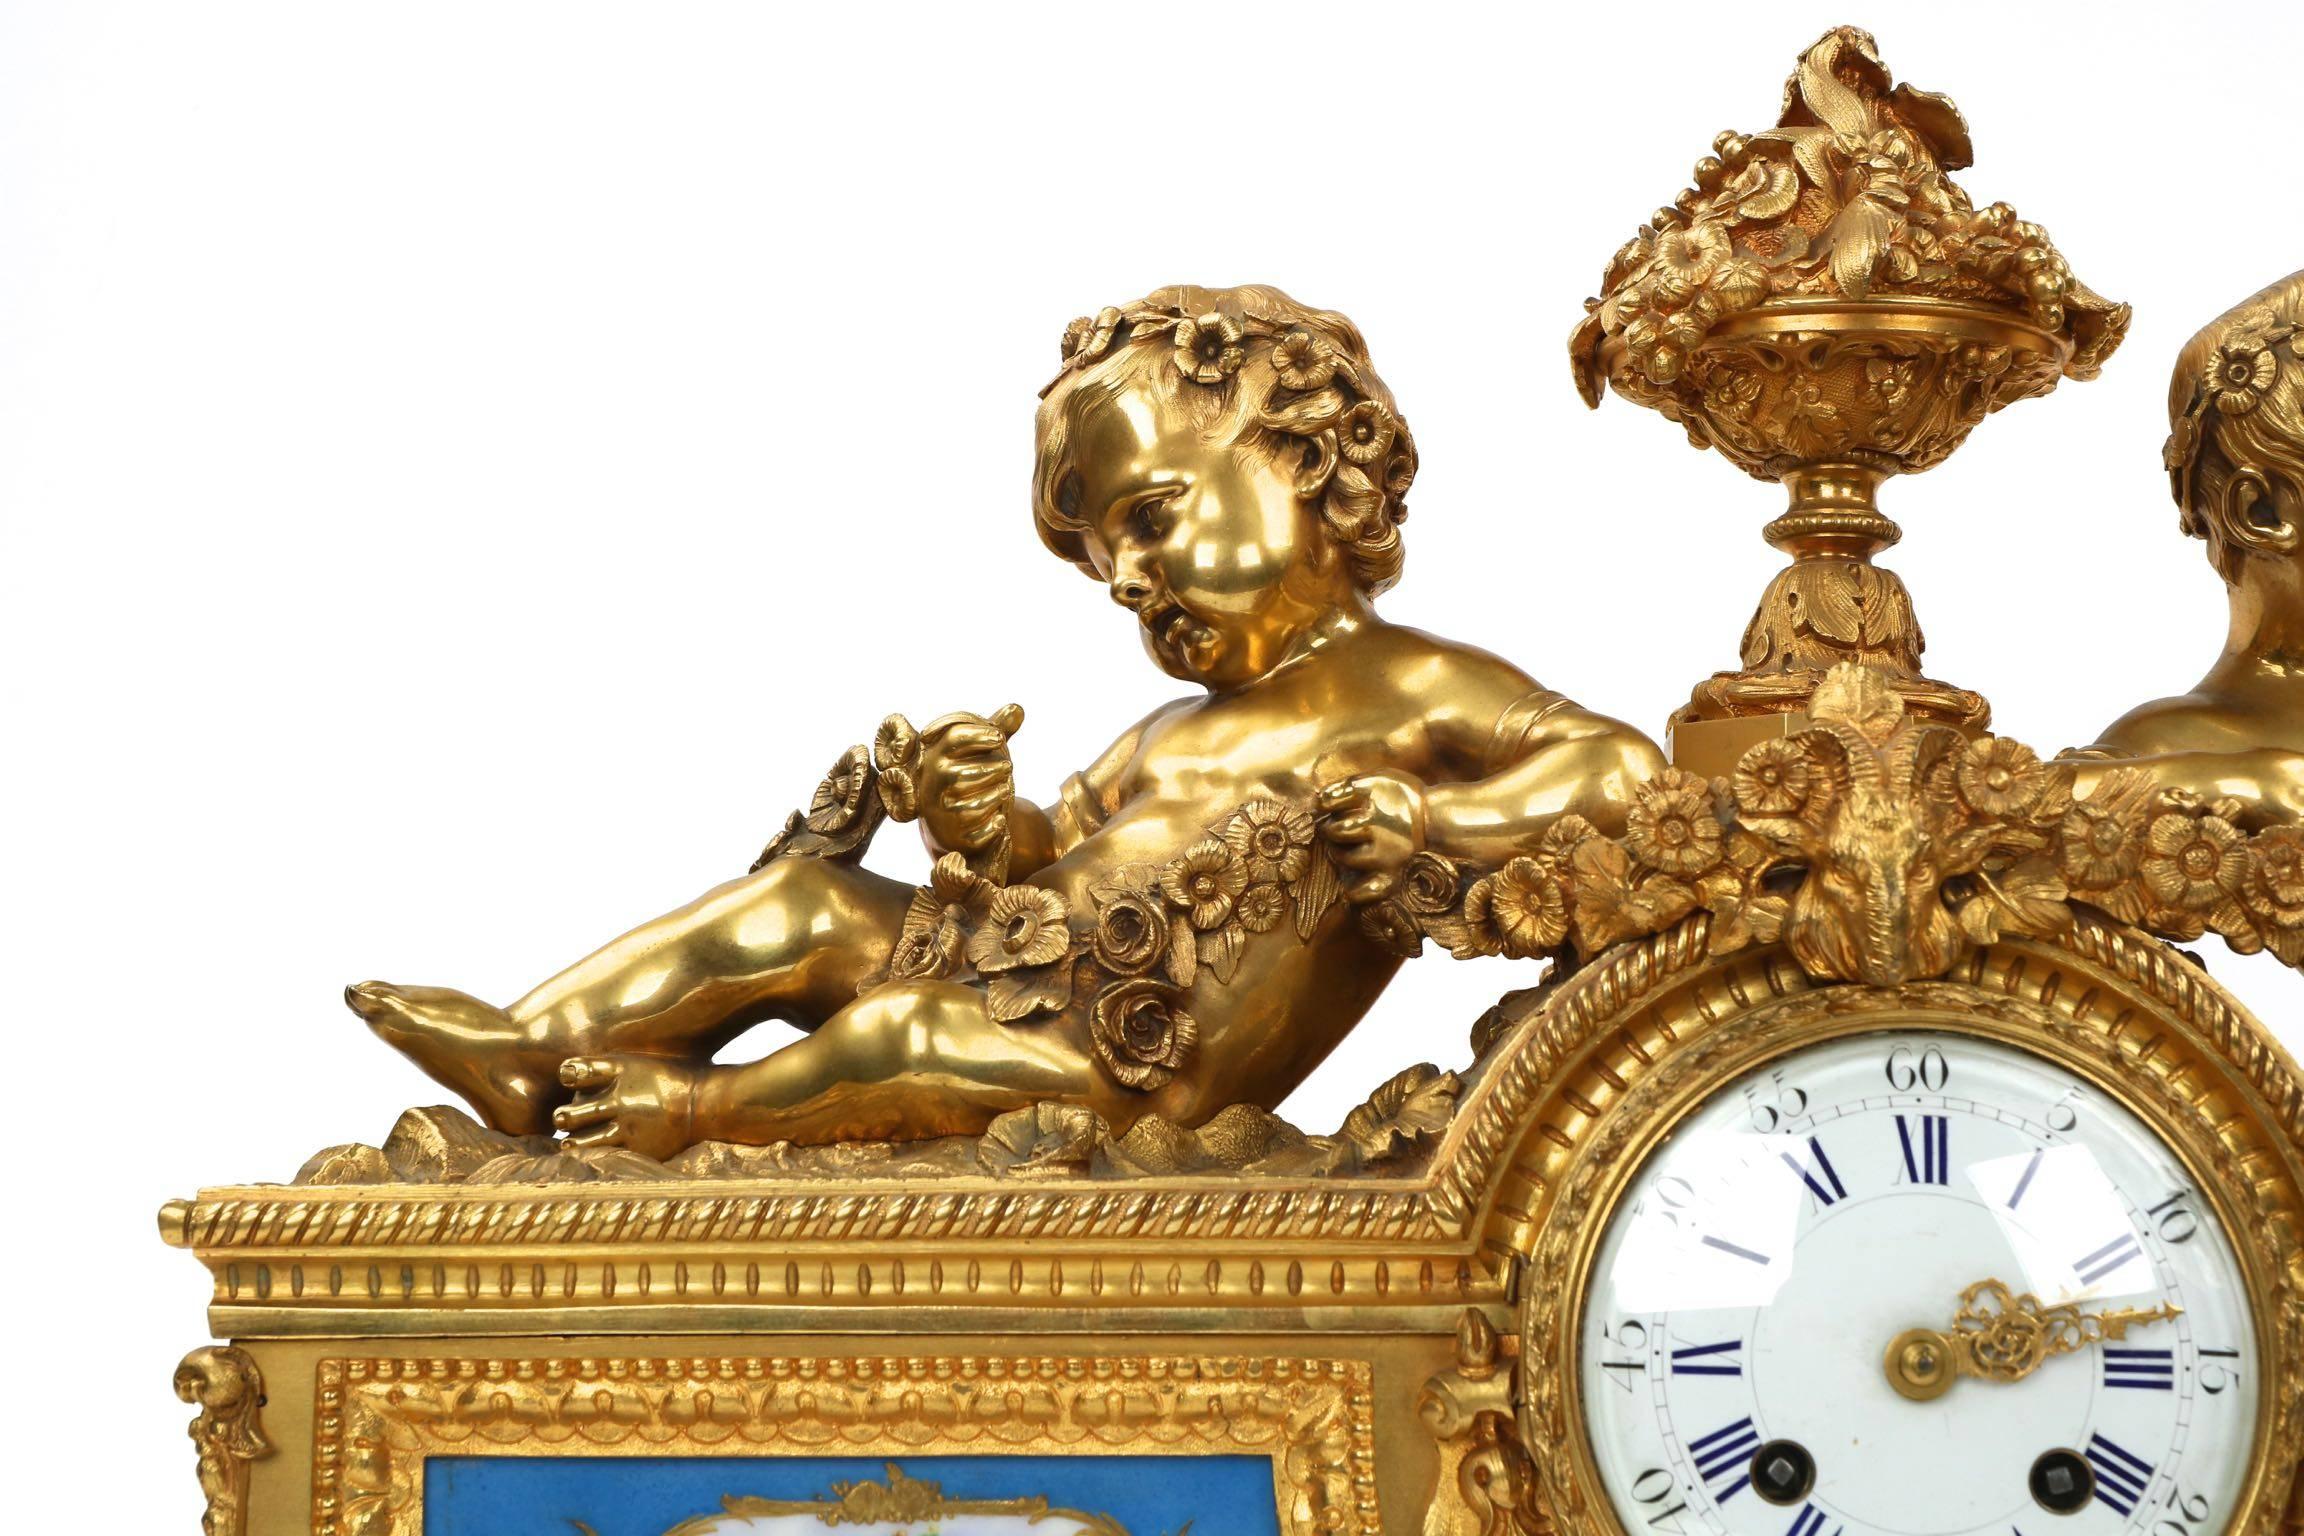 In every way a work of exquisite craftsmanship, this magnificent work of art is a complex and wonderful timepiece.  The case and figures are cast by the important and highly regarded bronzier Henri Picard, active in Paris 1839 through around 1884. 